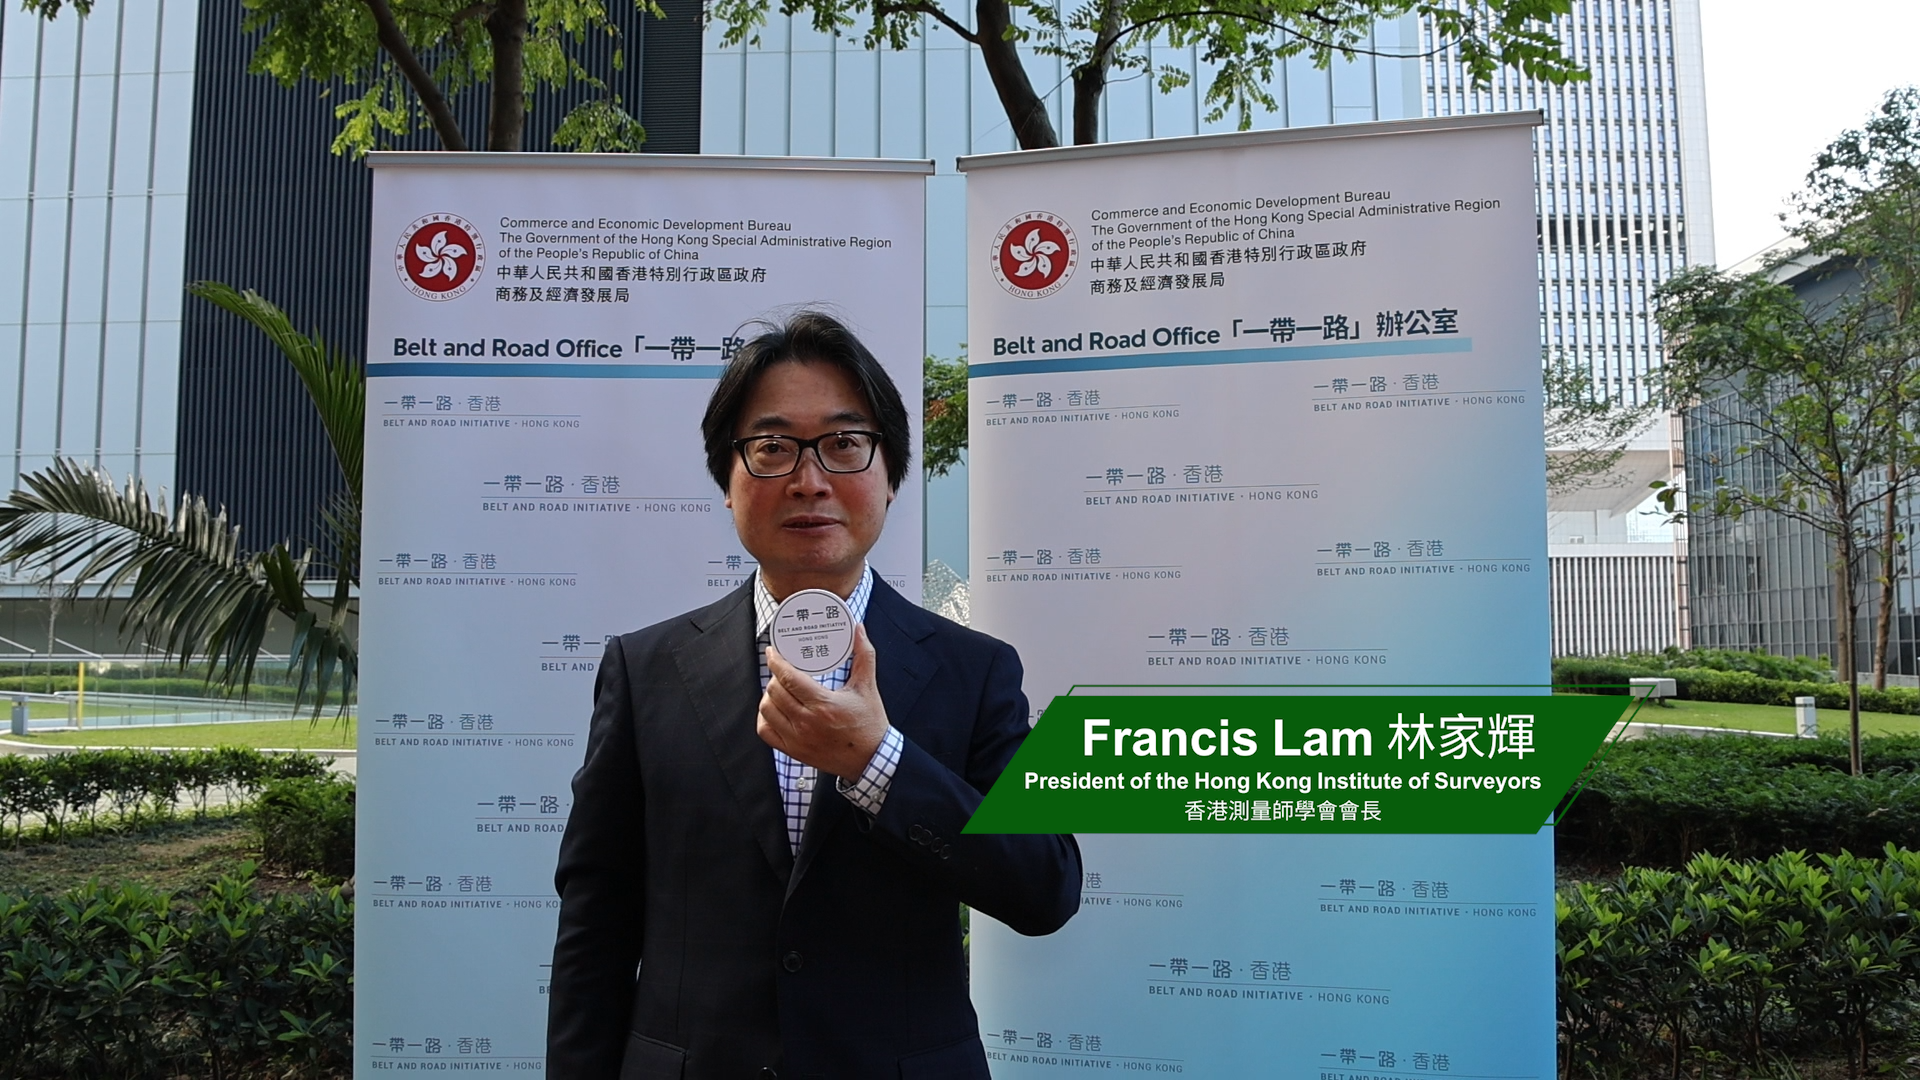 Interview with Mr Francis Lam